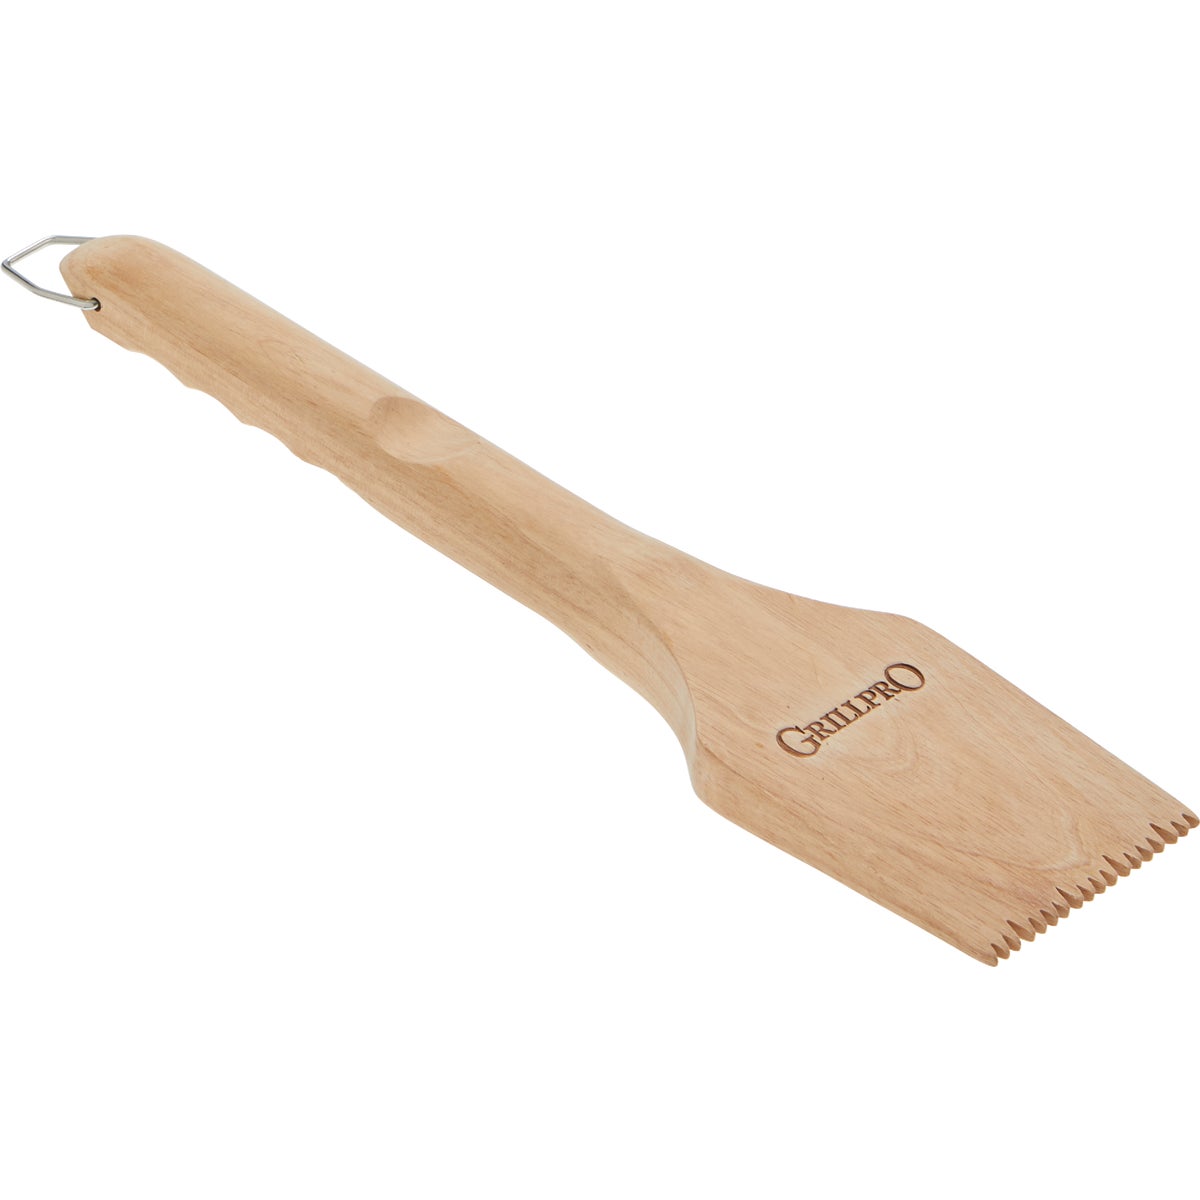 Item 800664, GrillPro Wooden Scraper scrapes on top of or between all shapes of cooking 